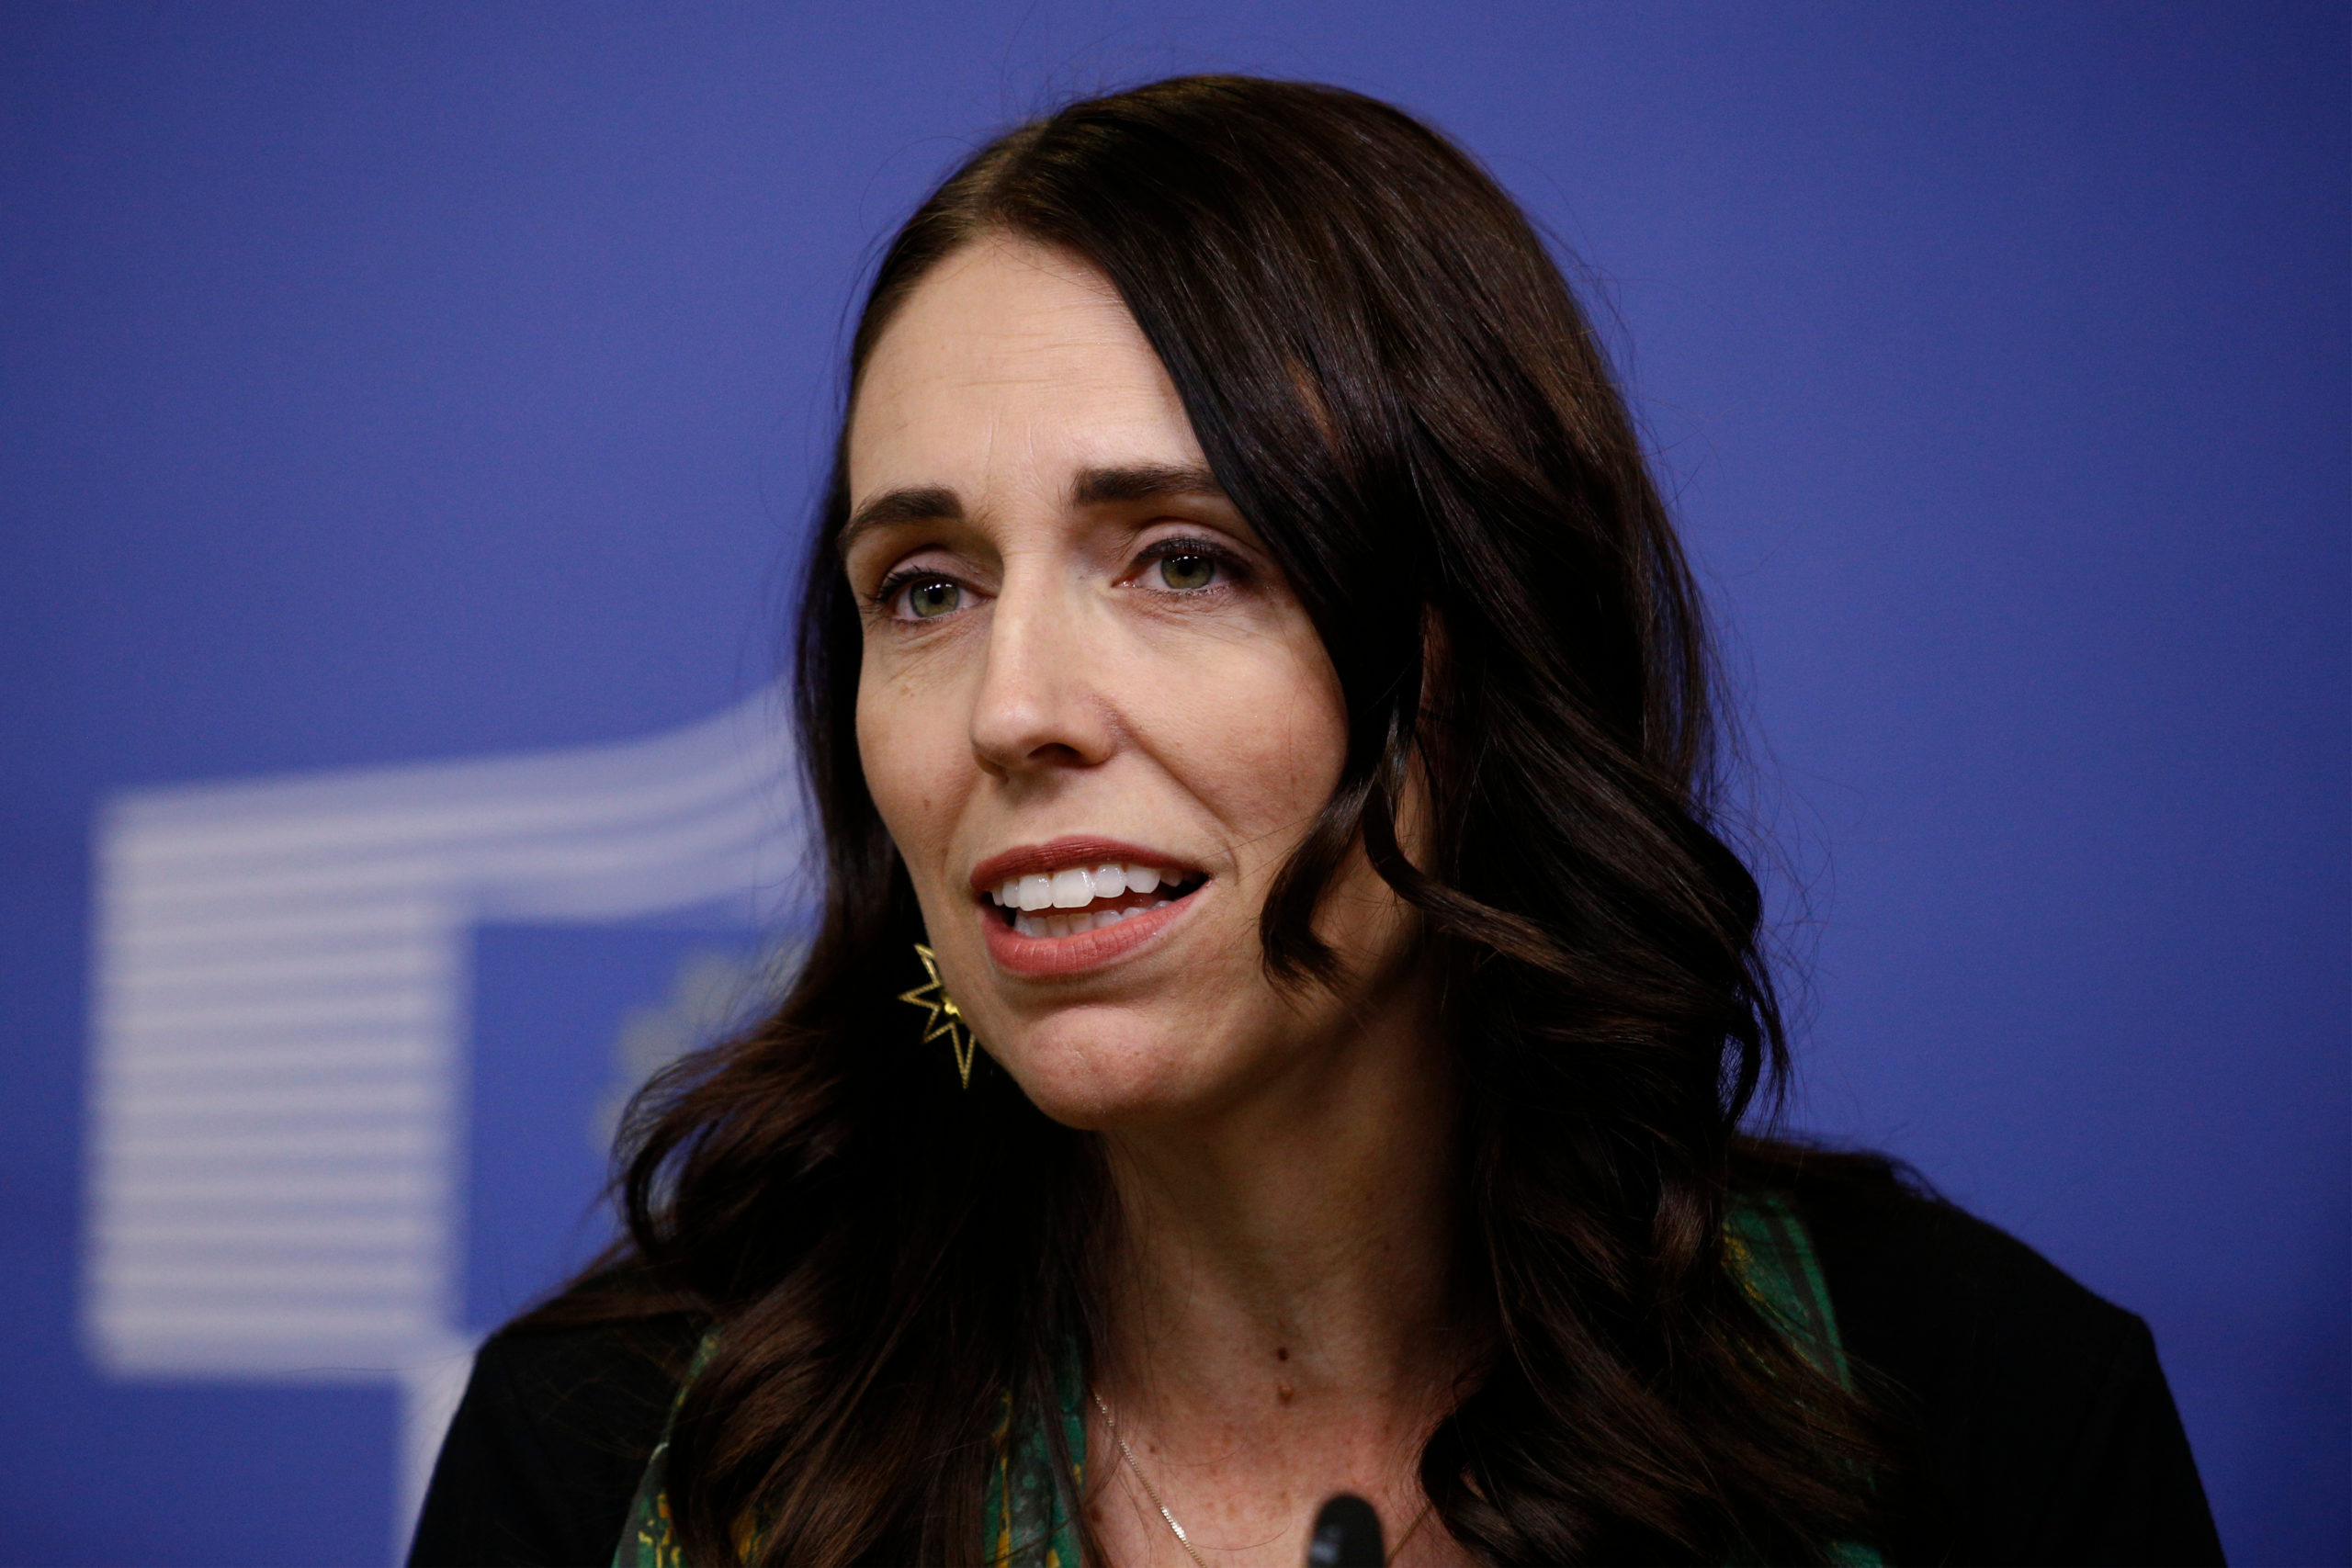 What healthcare companies can expect from Jacinda Ardern’s second term in New Zealand